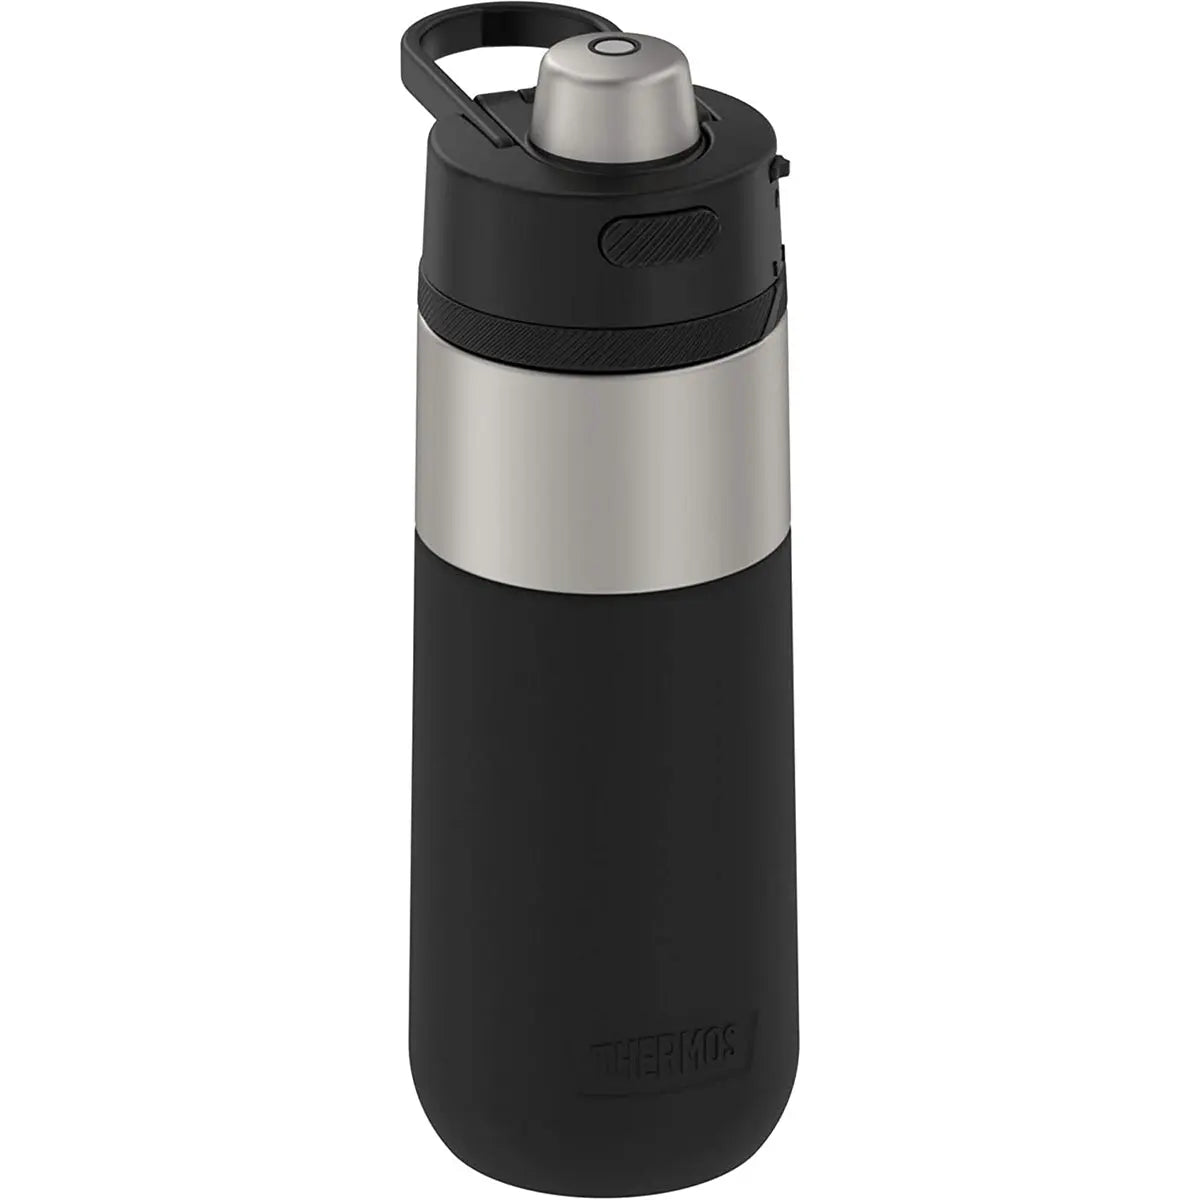 Thermos 18 oz Guardian Stainless Steel Water Bottle - Matte Steel/Espresso Black Thermos